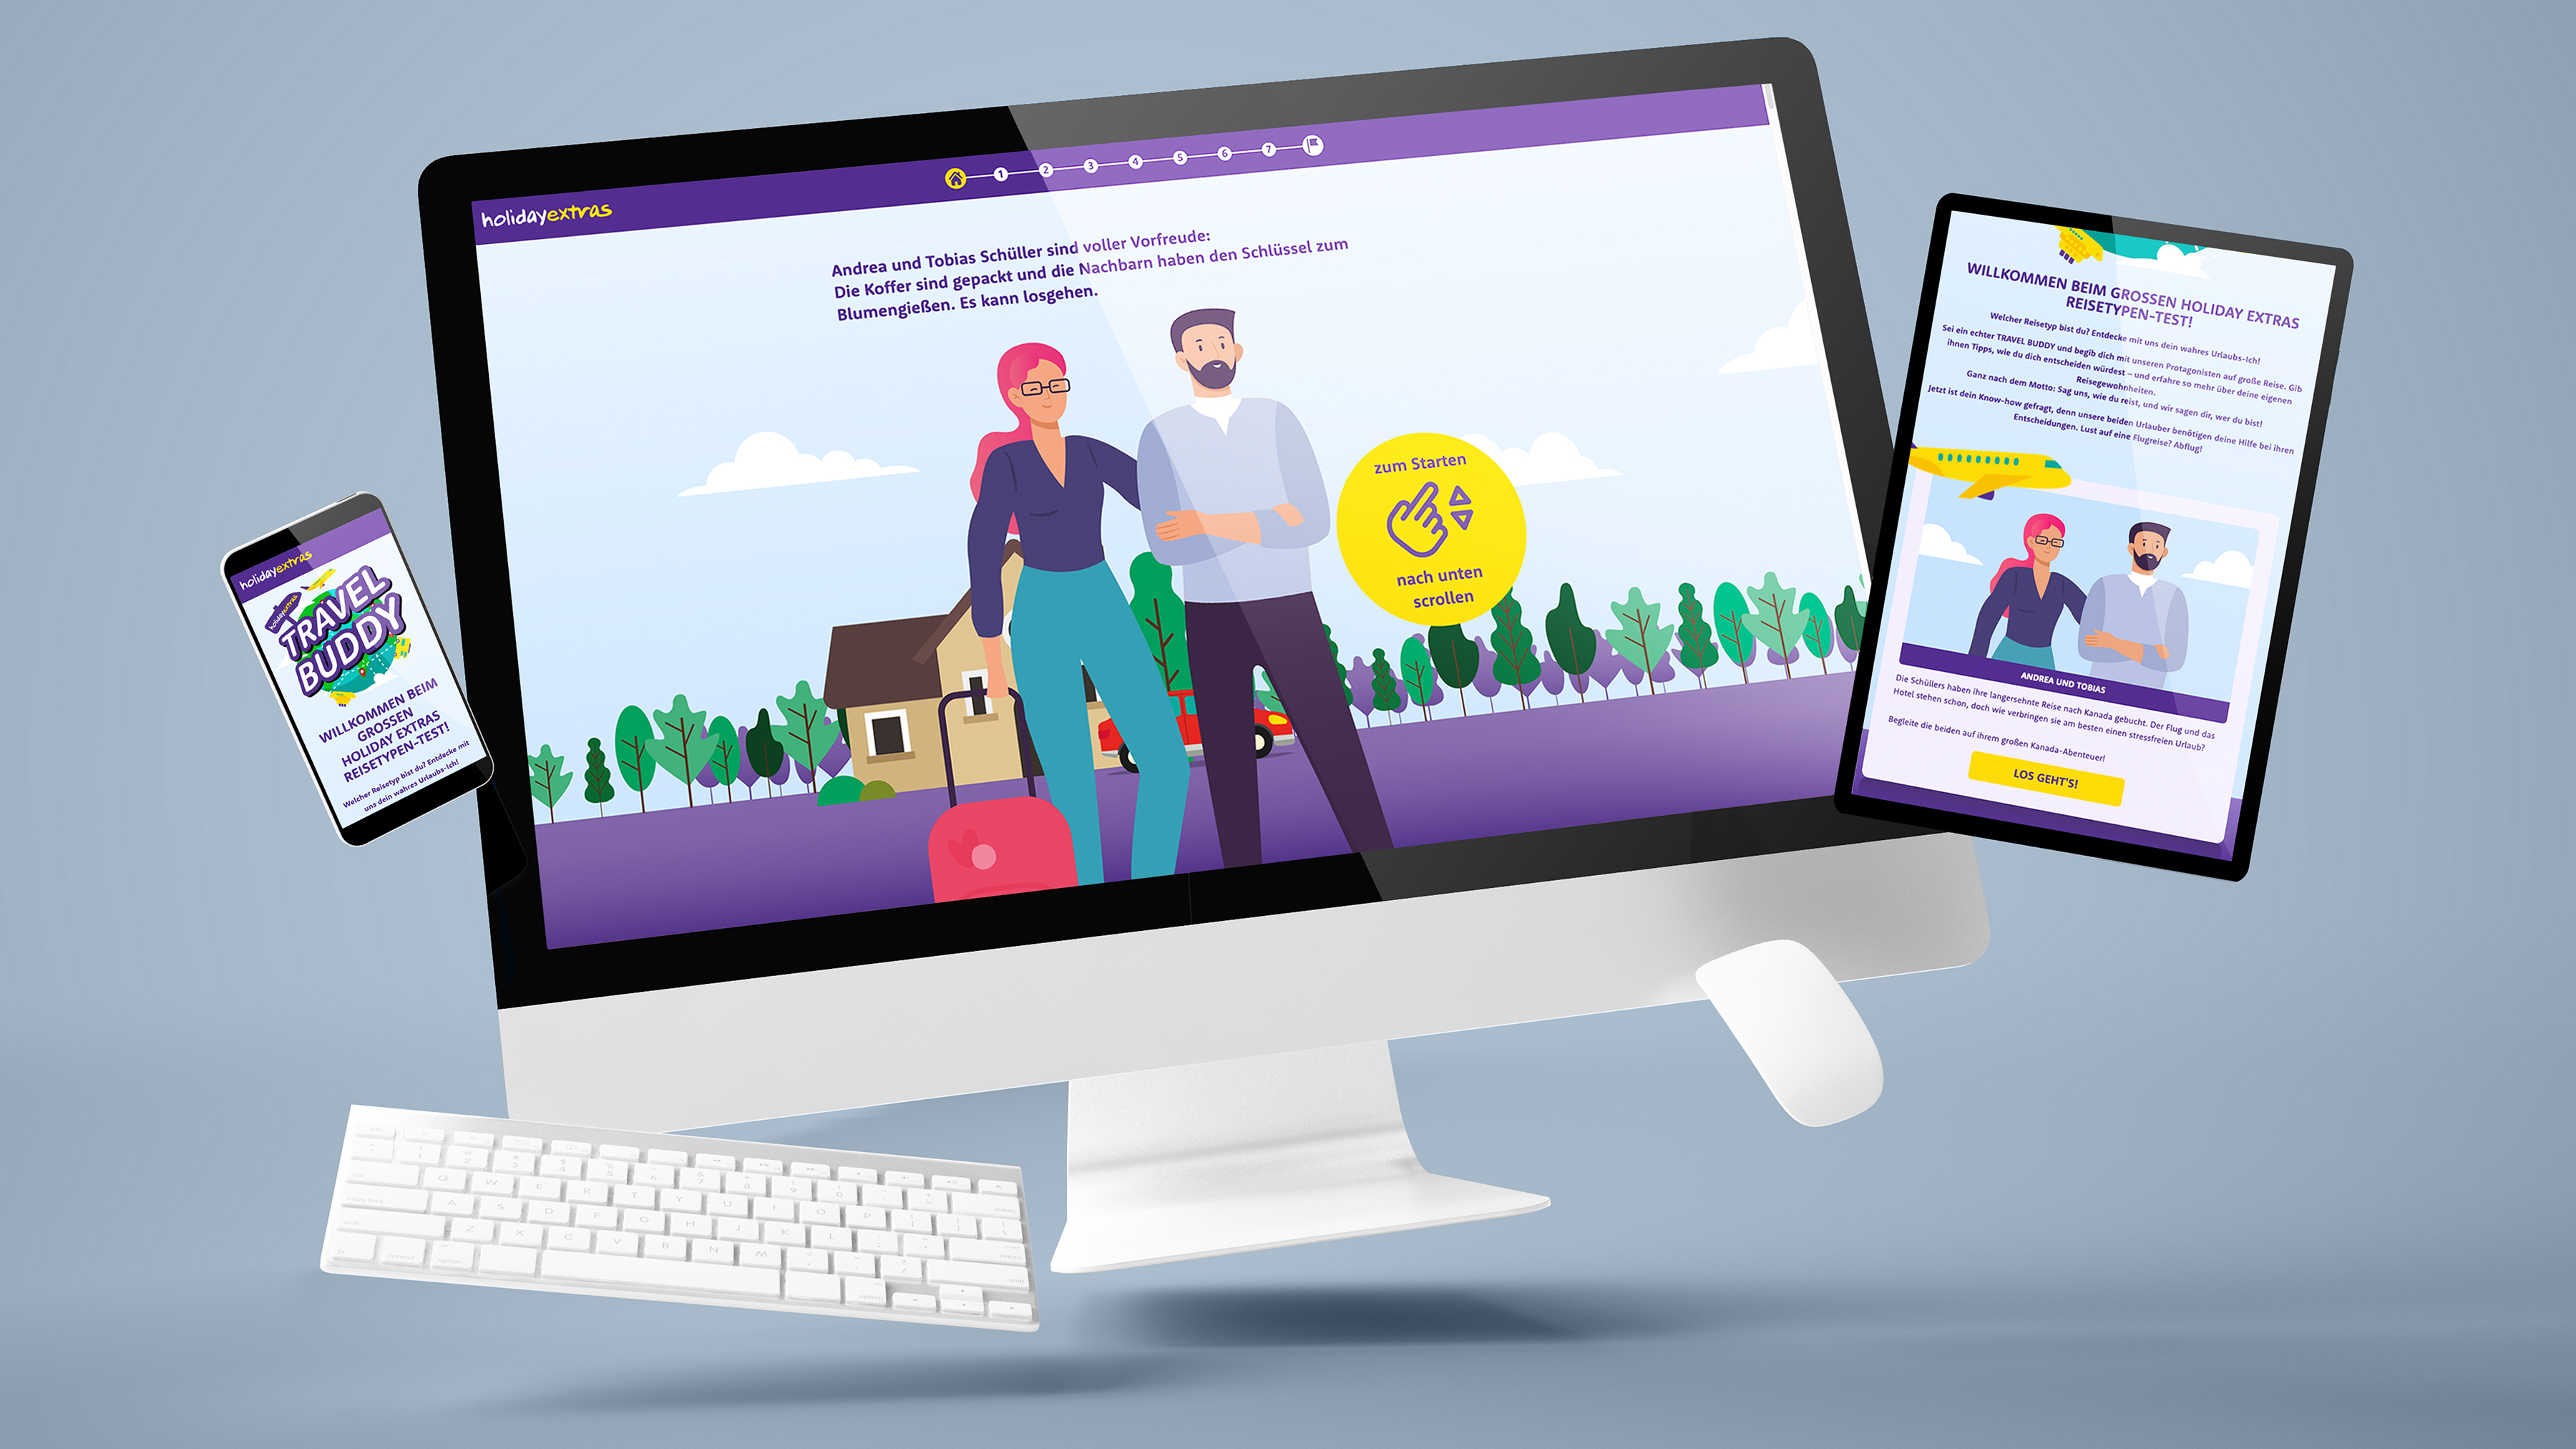 The Travel Buddy by Holiday Extras